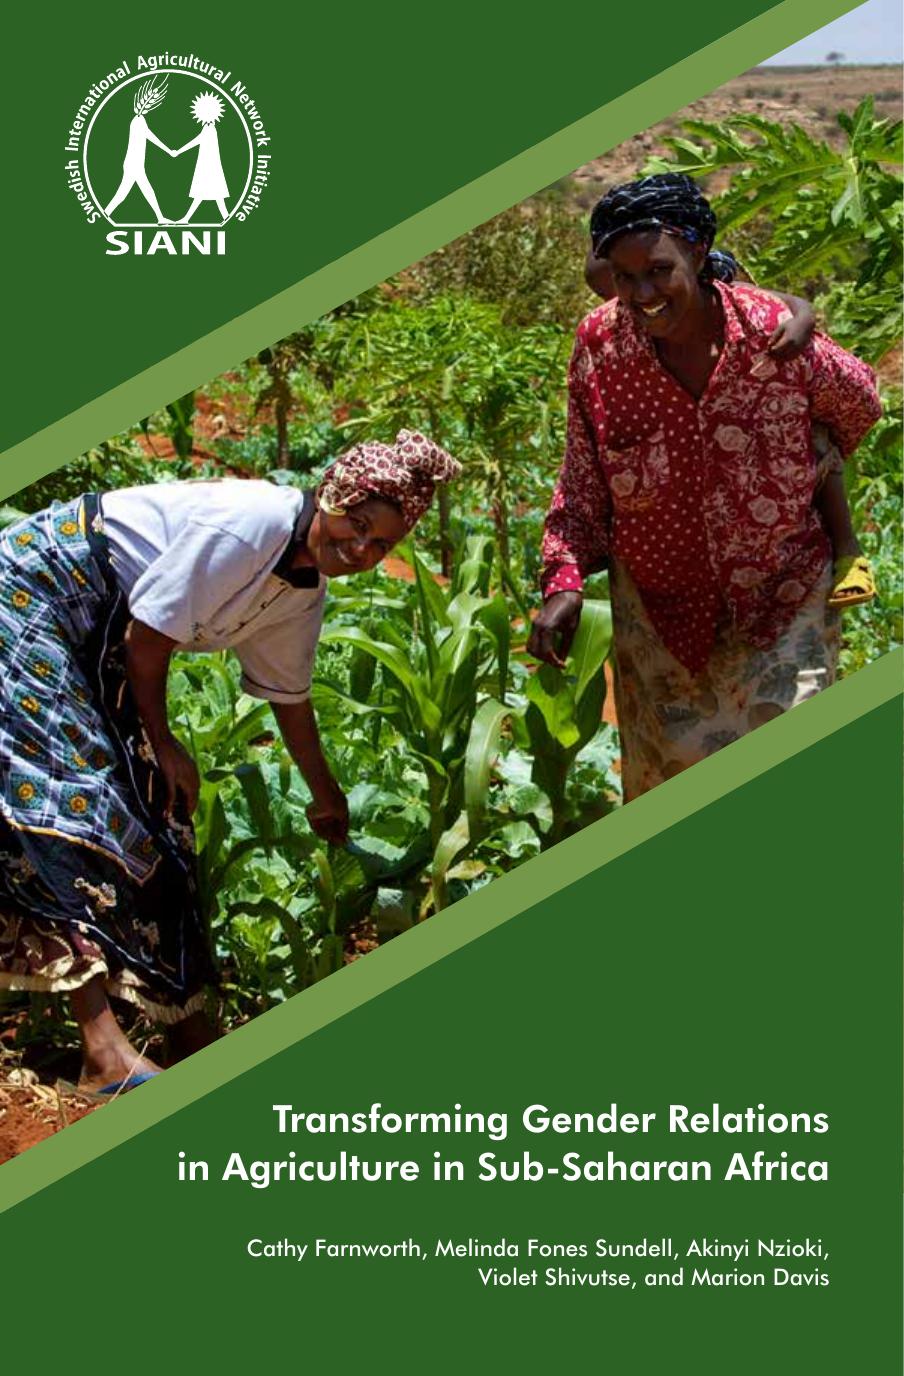 Transforming gender relations agriculture in Sub-Saharan Africa 2013